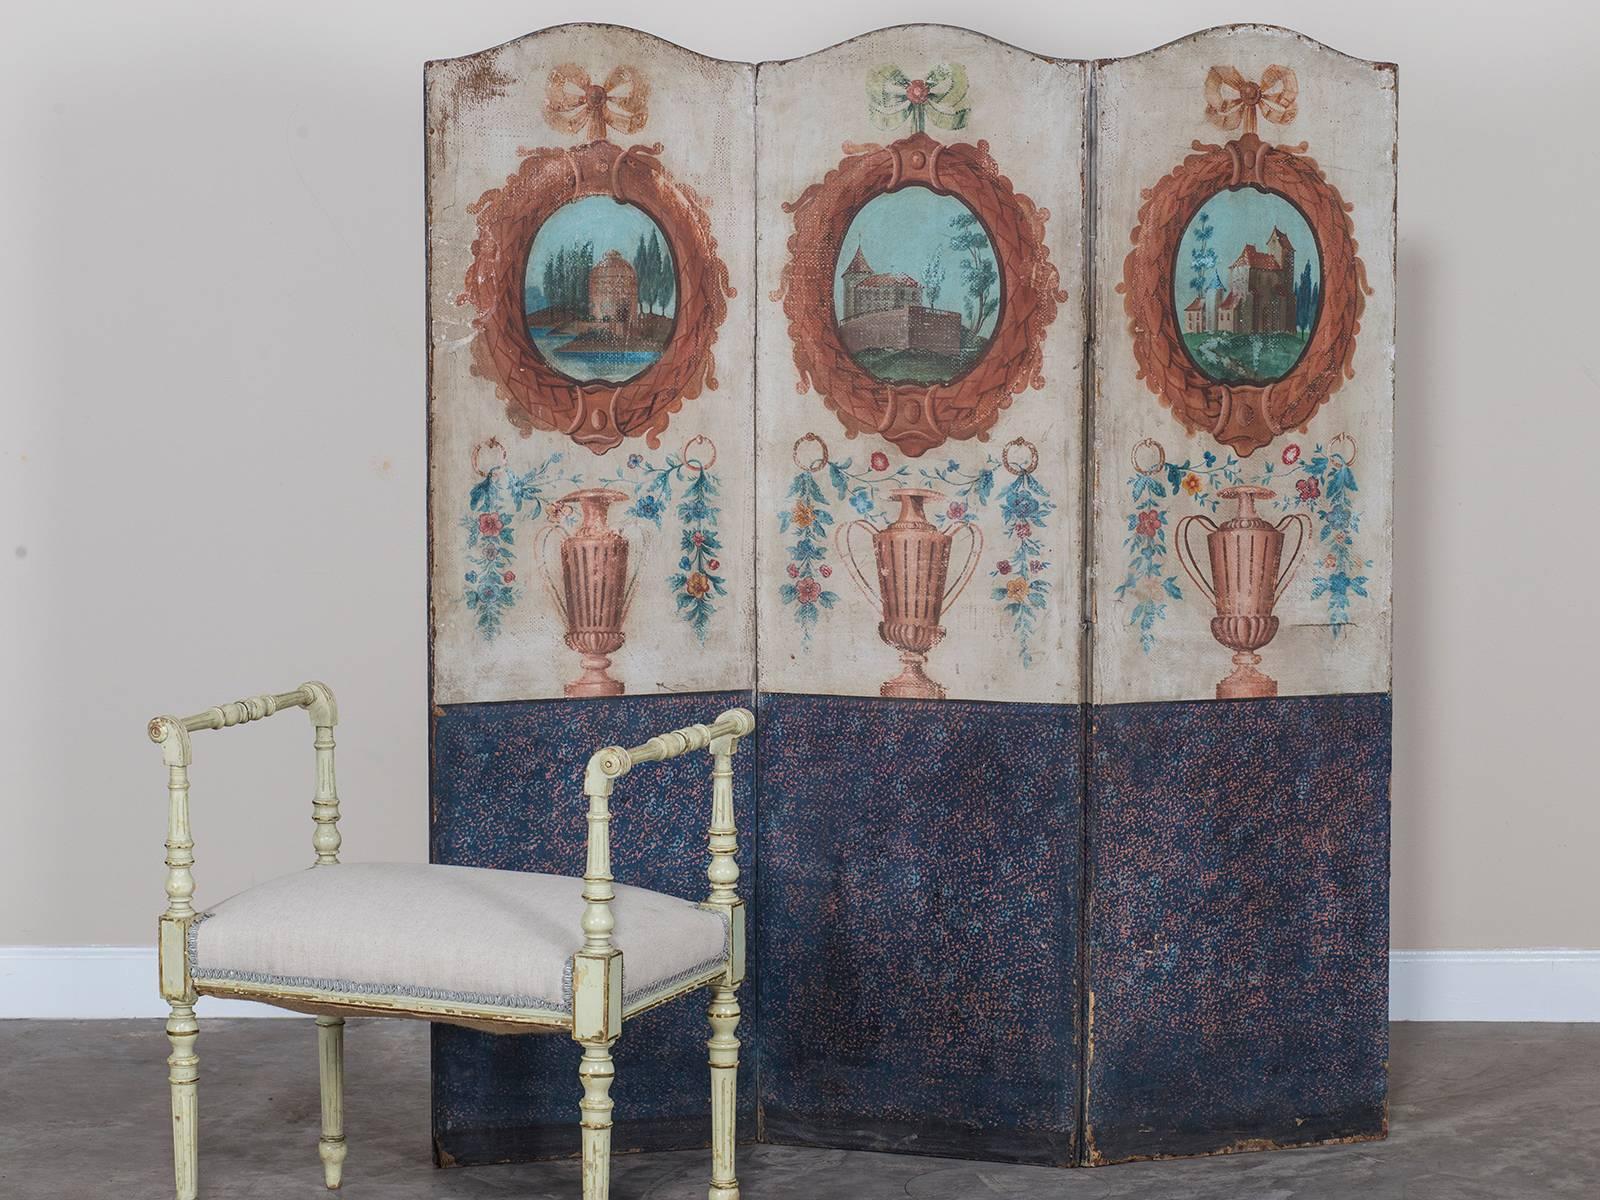 Receive our new selections direct from 1stdibs by email each week. Please click follow dealer below and see them first!

The painted design on this antique French screen or paravent, circa 1880 is full of neoclassical references with a sense of